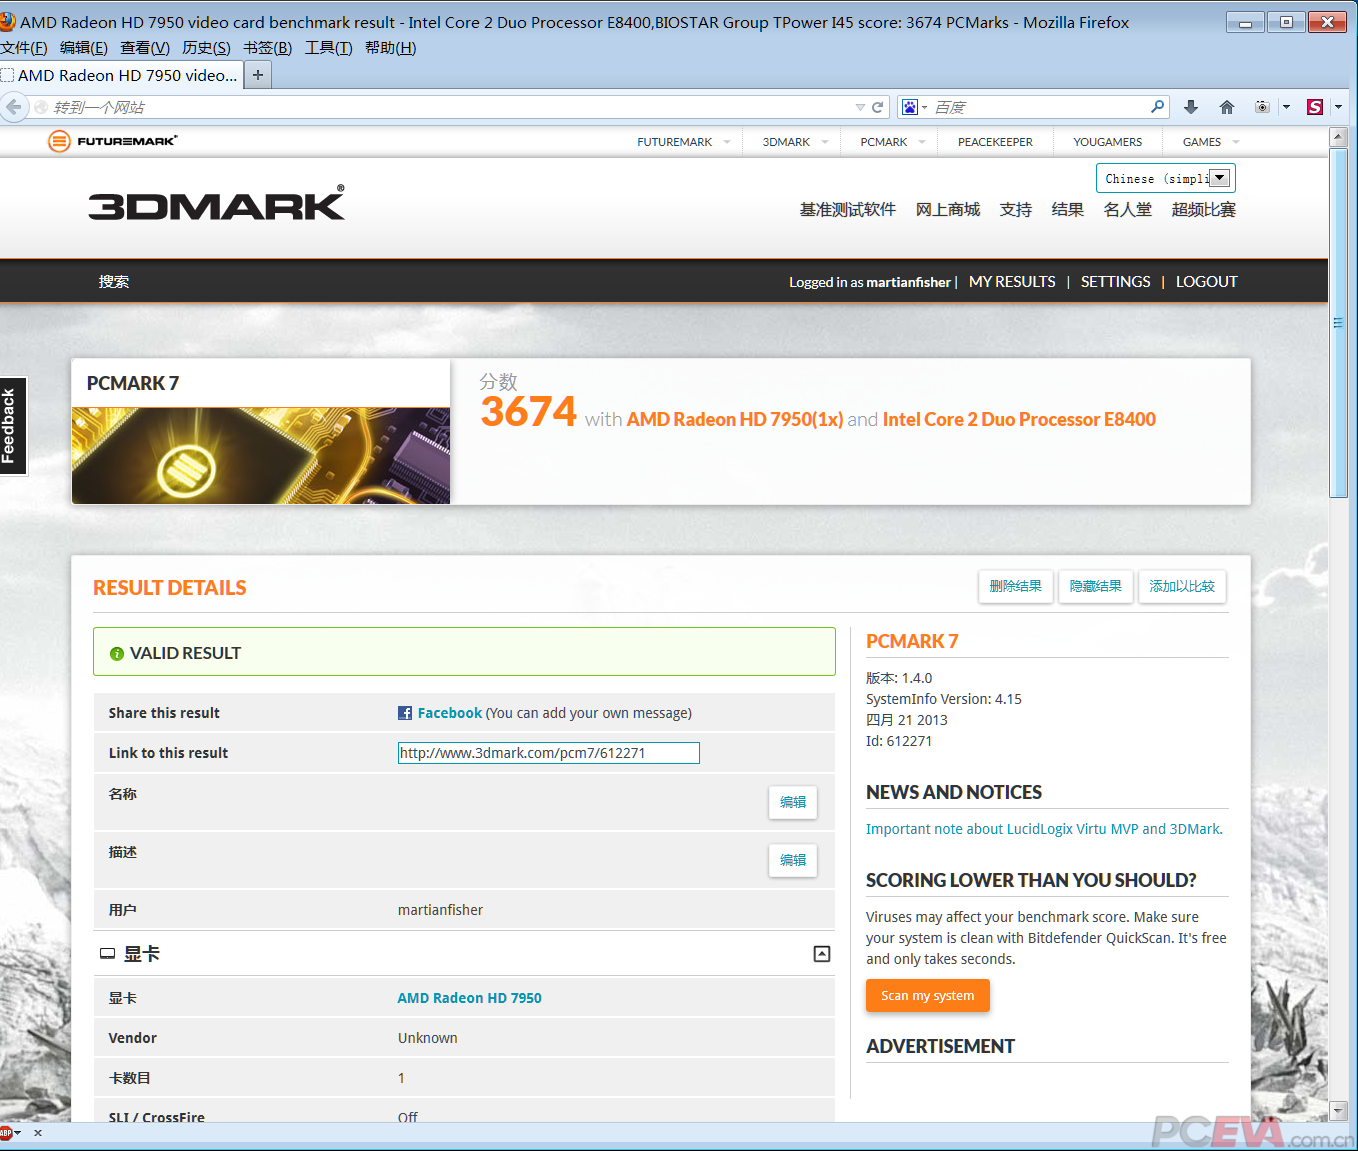 PCMARK7 3674 with AMD Radeon HD 7950(1x) and Intel Core 2 Duo Processor E8400.PNG